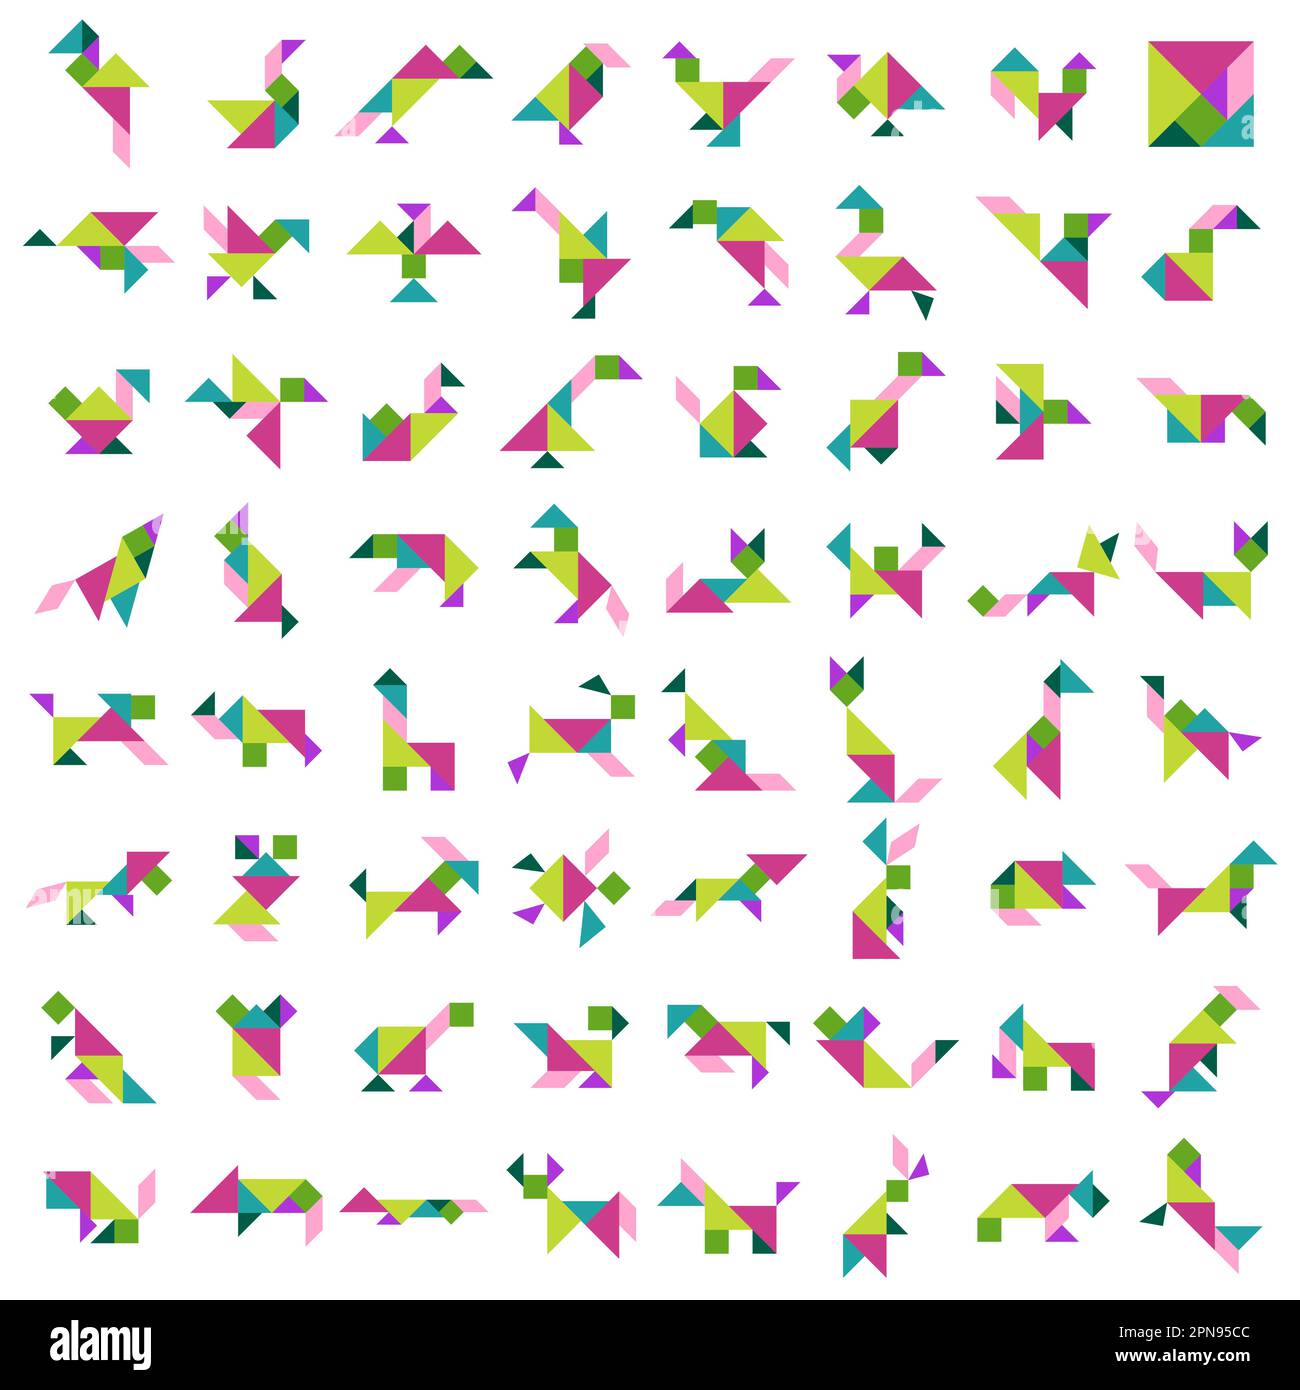 Tangram puzzle. Vector set with various animals. Stock Vector